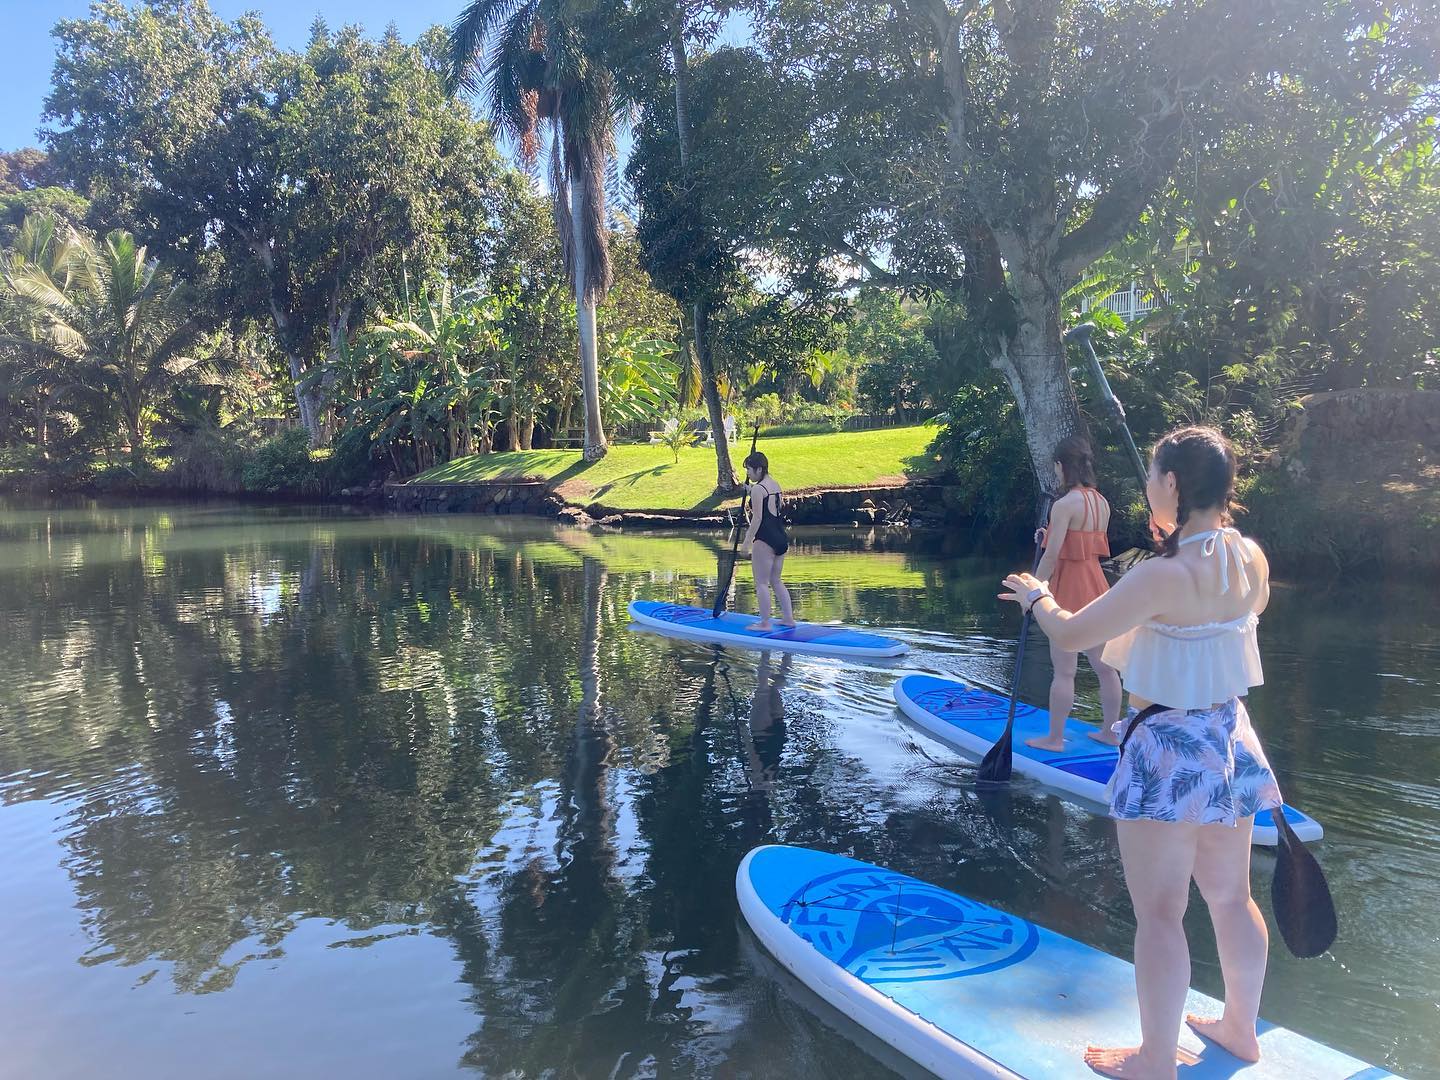 Rent a SUP or Kayak in Haleiwa